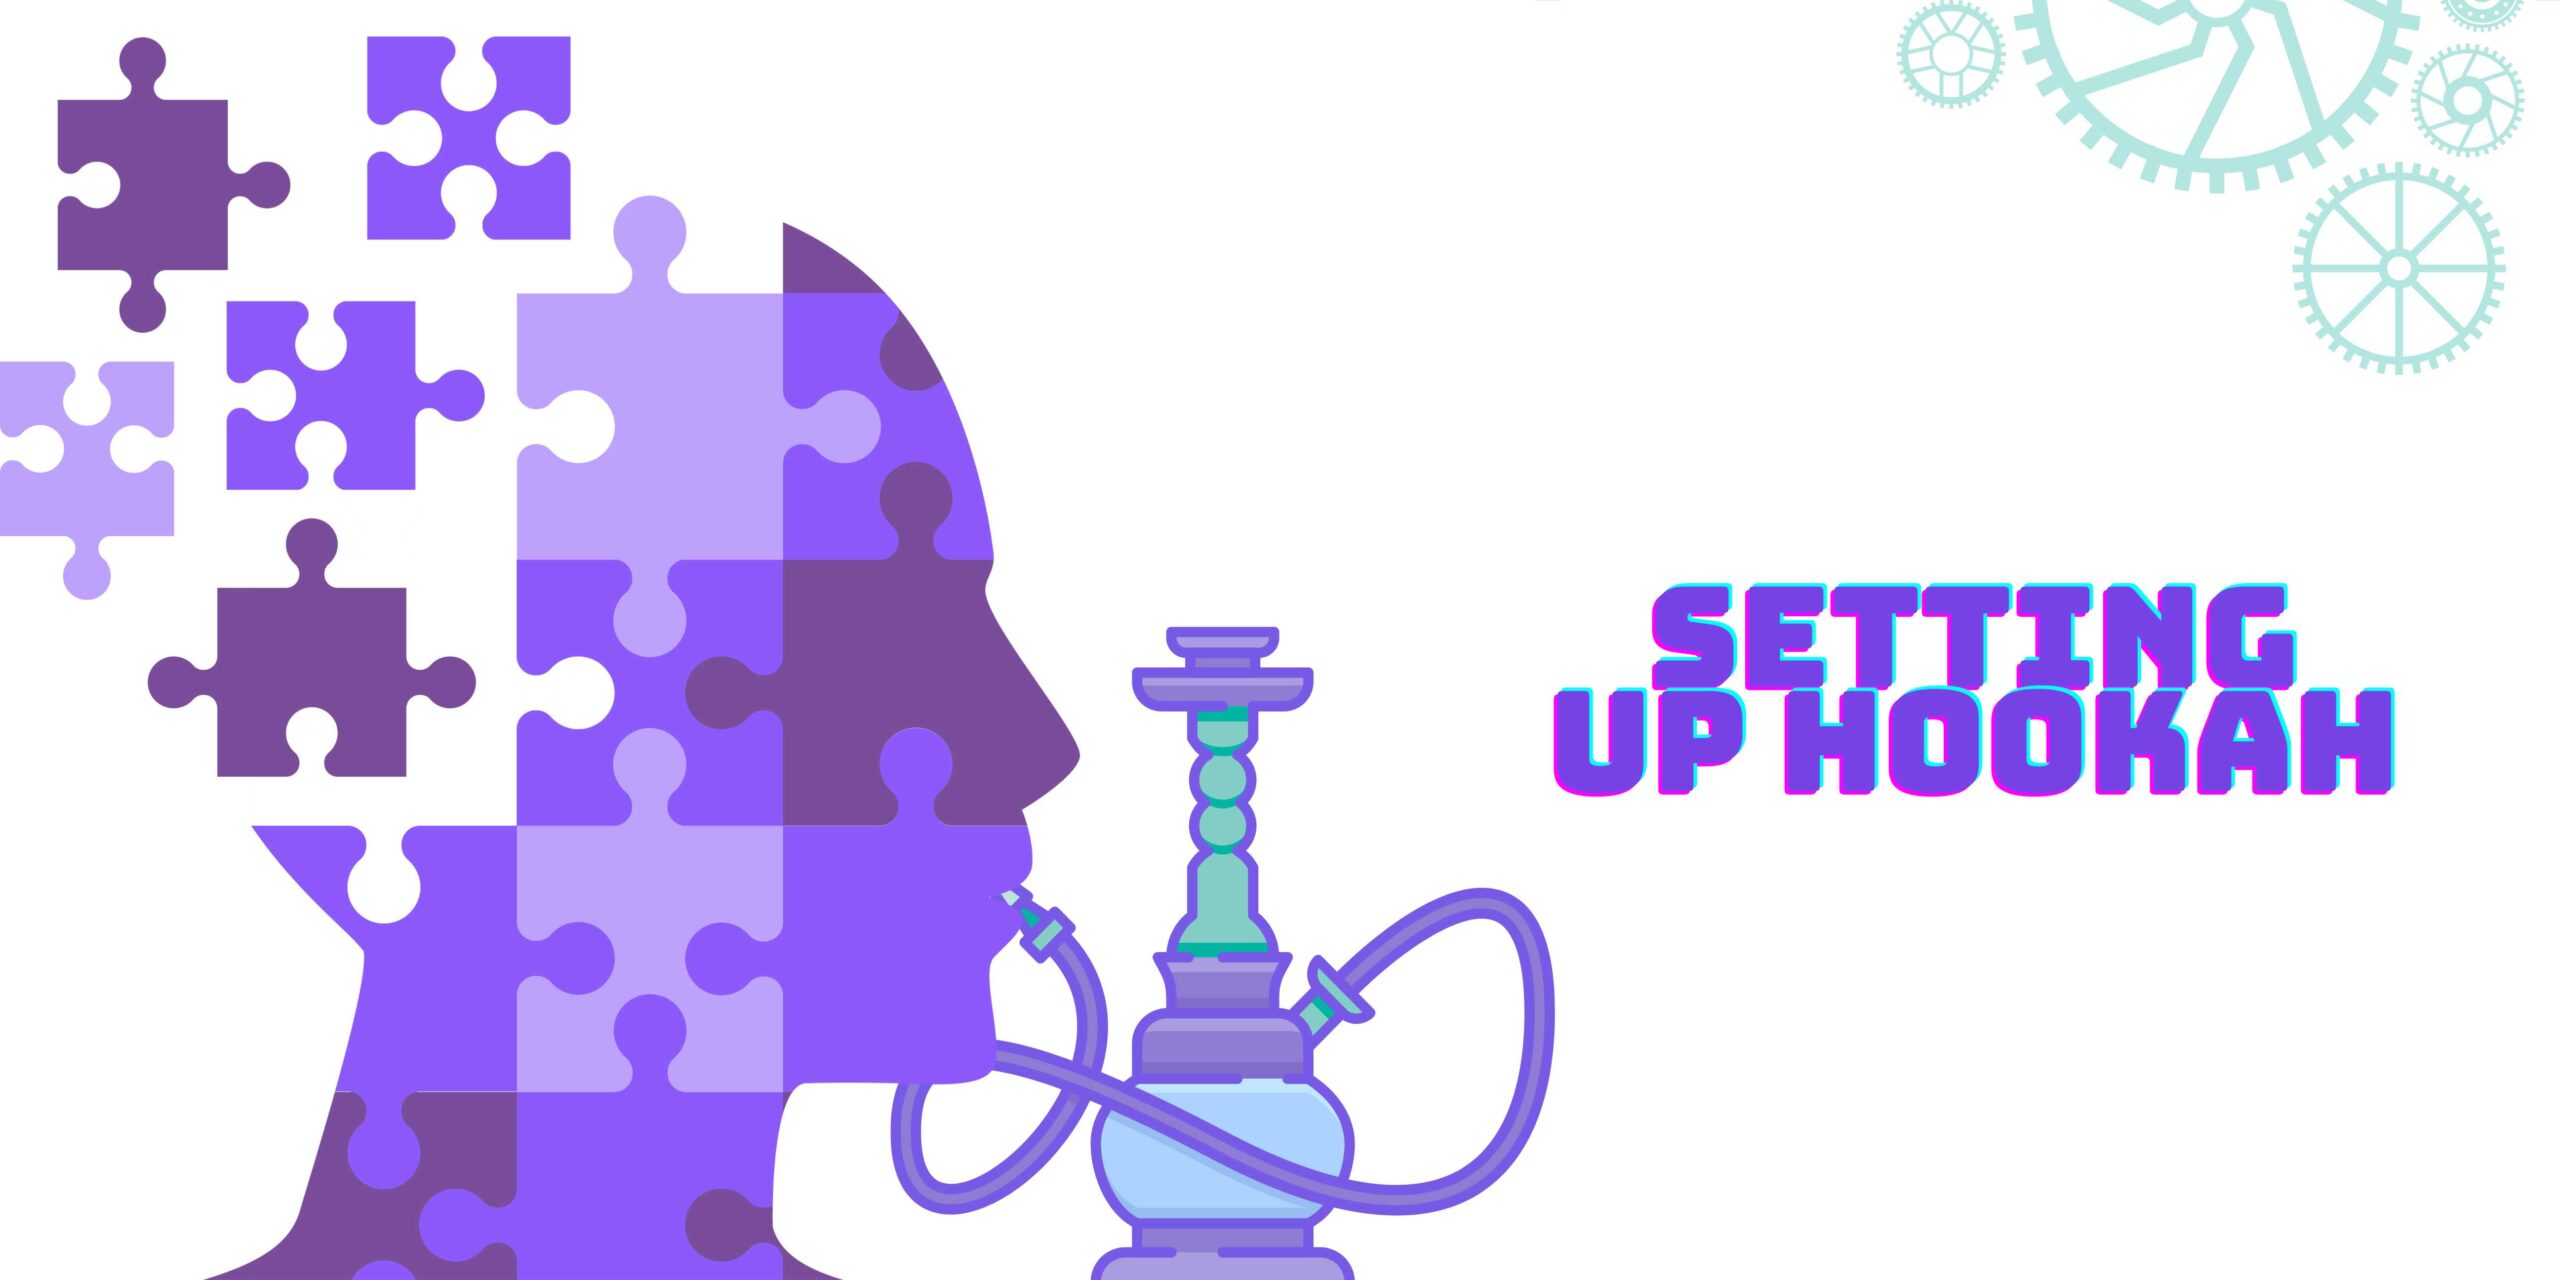 An image showing a jigsaw of human brain thinking how to set up hookah at home while smoking hookah